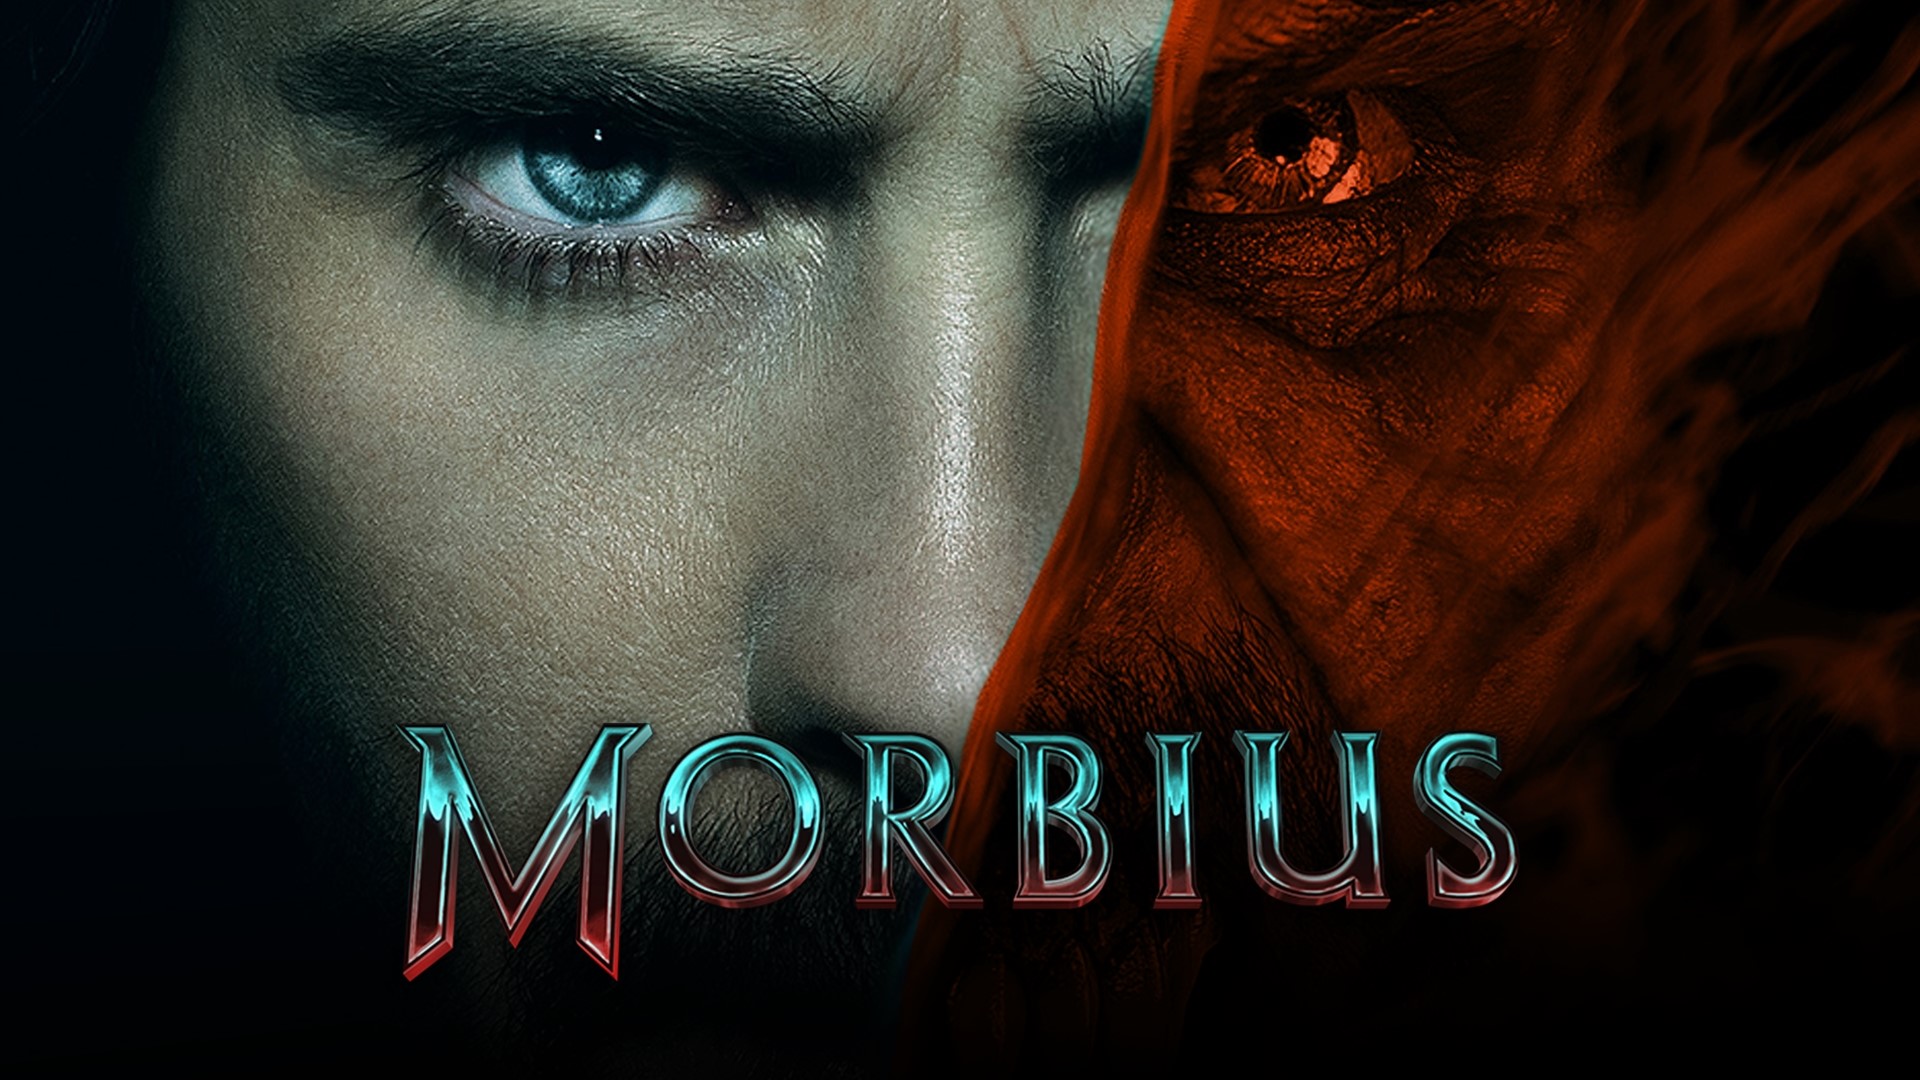 Yes, Morbius is bland and yes, the plot is routine. But the action is good and there is enough for fans to like.